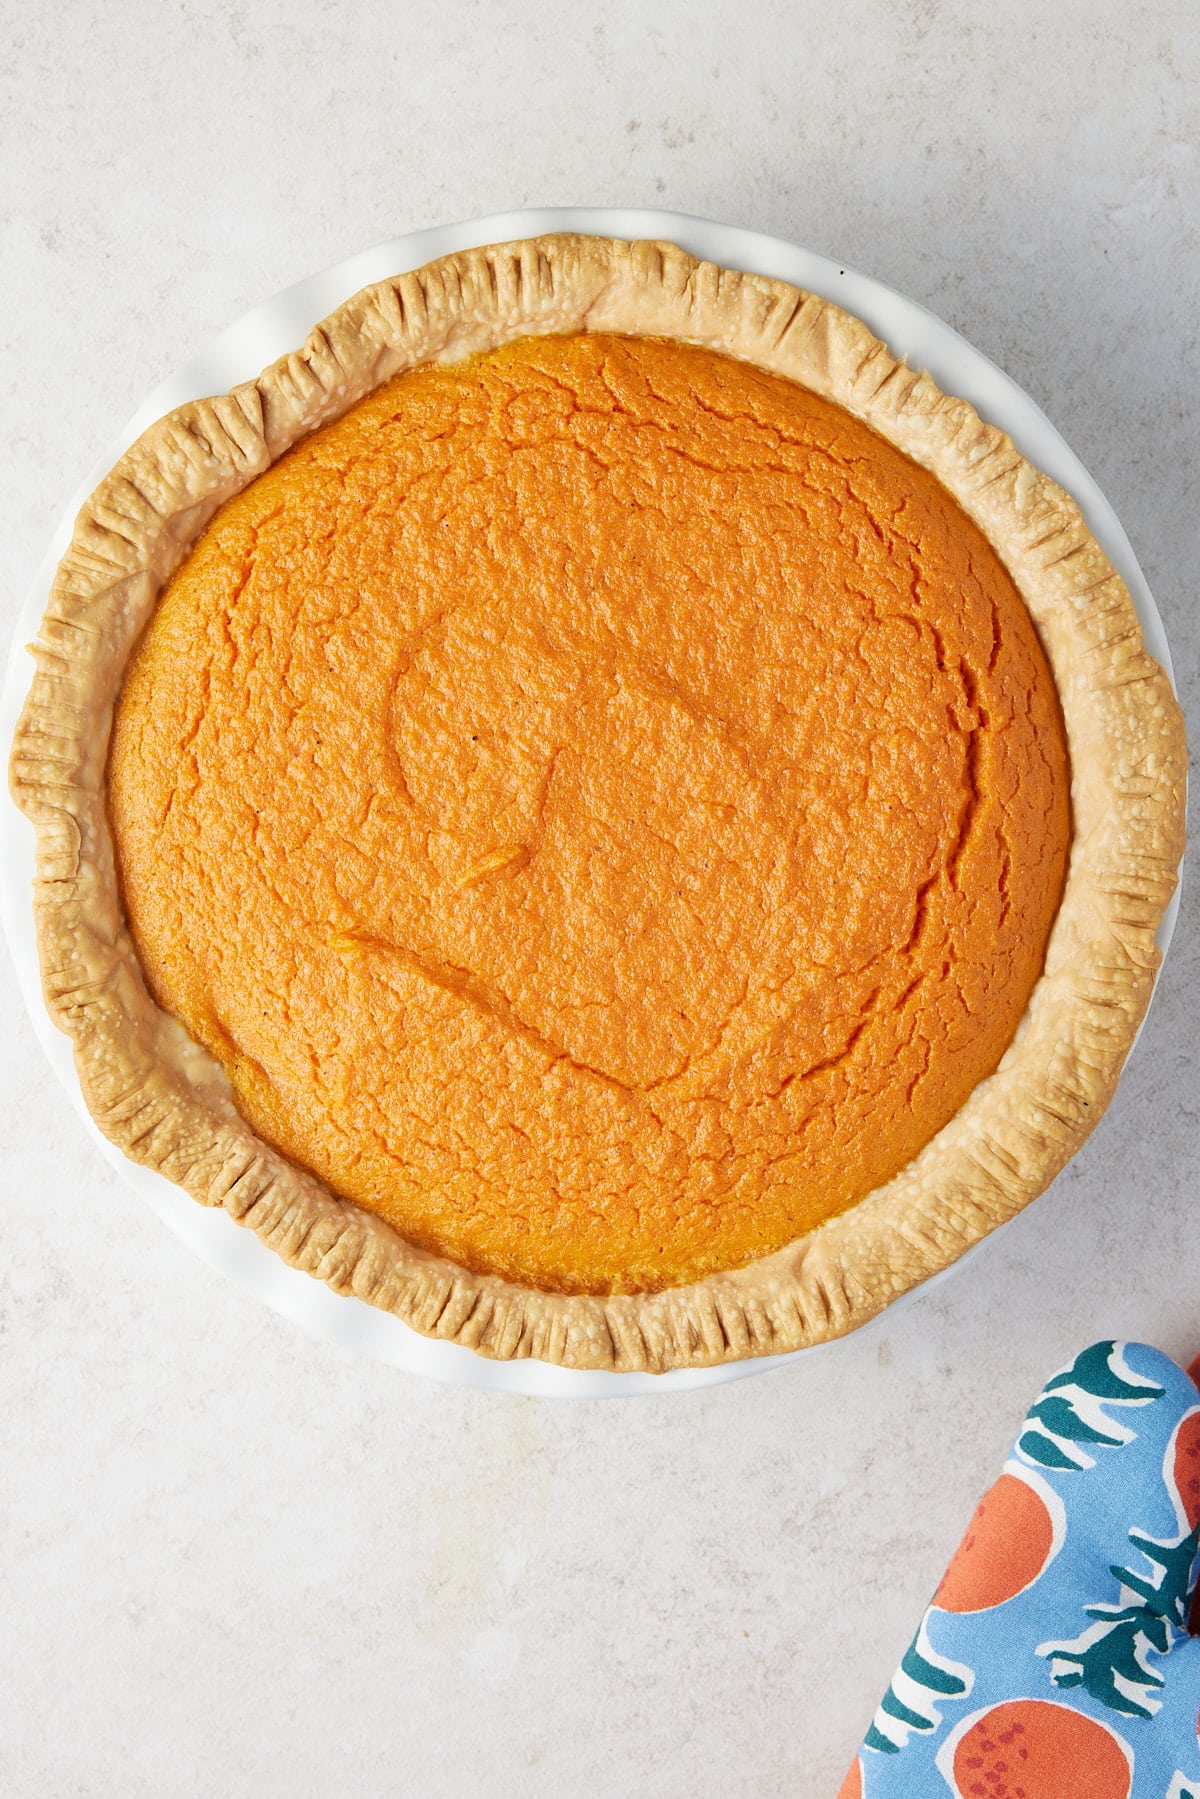 Top down image of a baked carrot pie